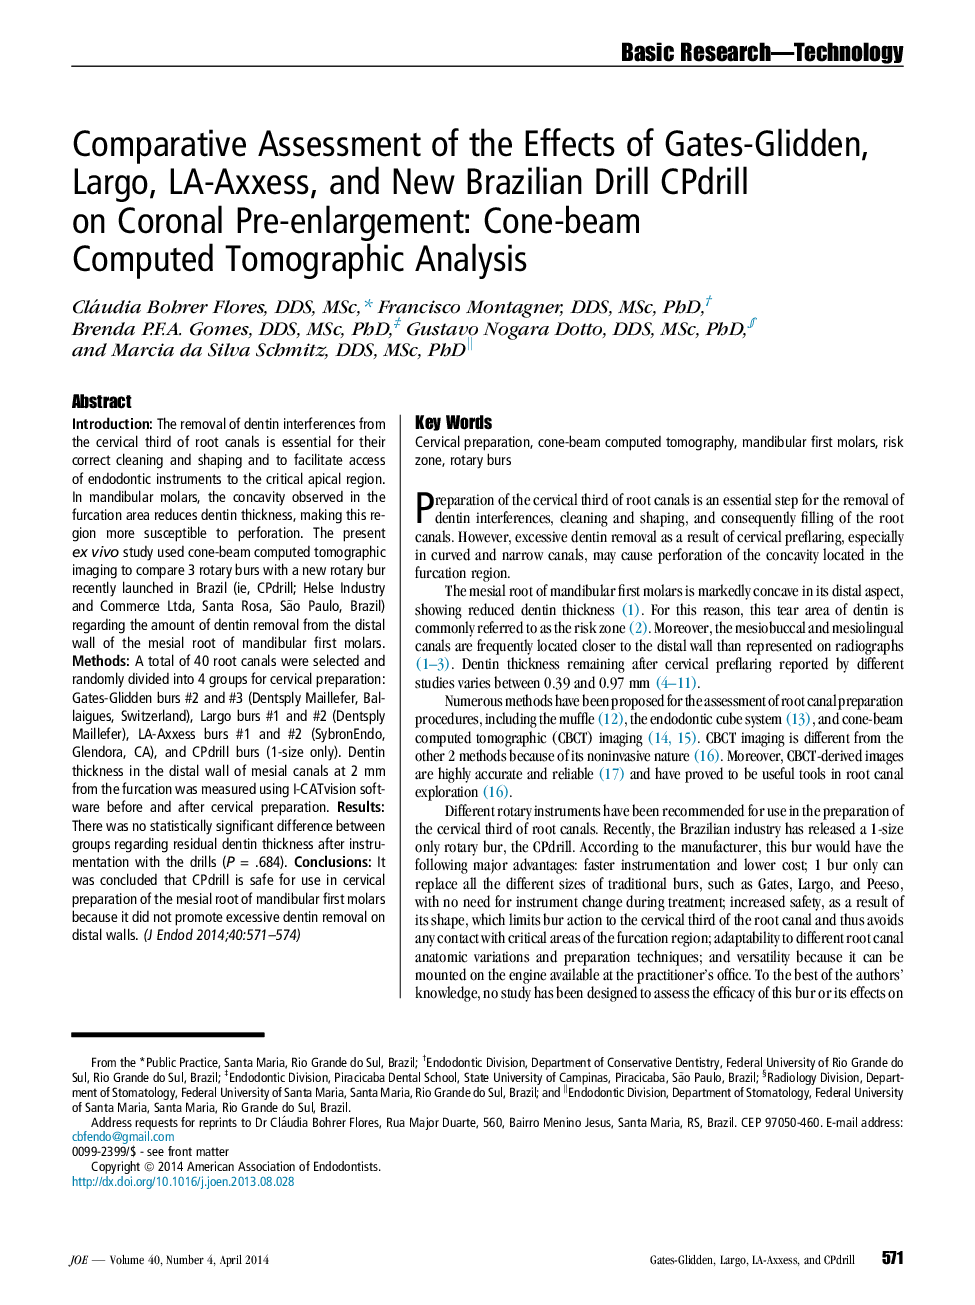 Comparative Assessment of the Effects of Gates-Glidden, Largo, LA-Axxess, and New Brazilian Drill CPdrill on Coronal Pre-enlargement: Cone-beam Computed Tomographic Analysis